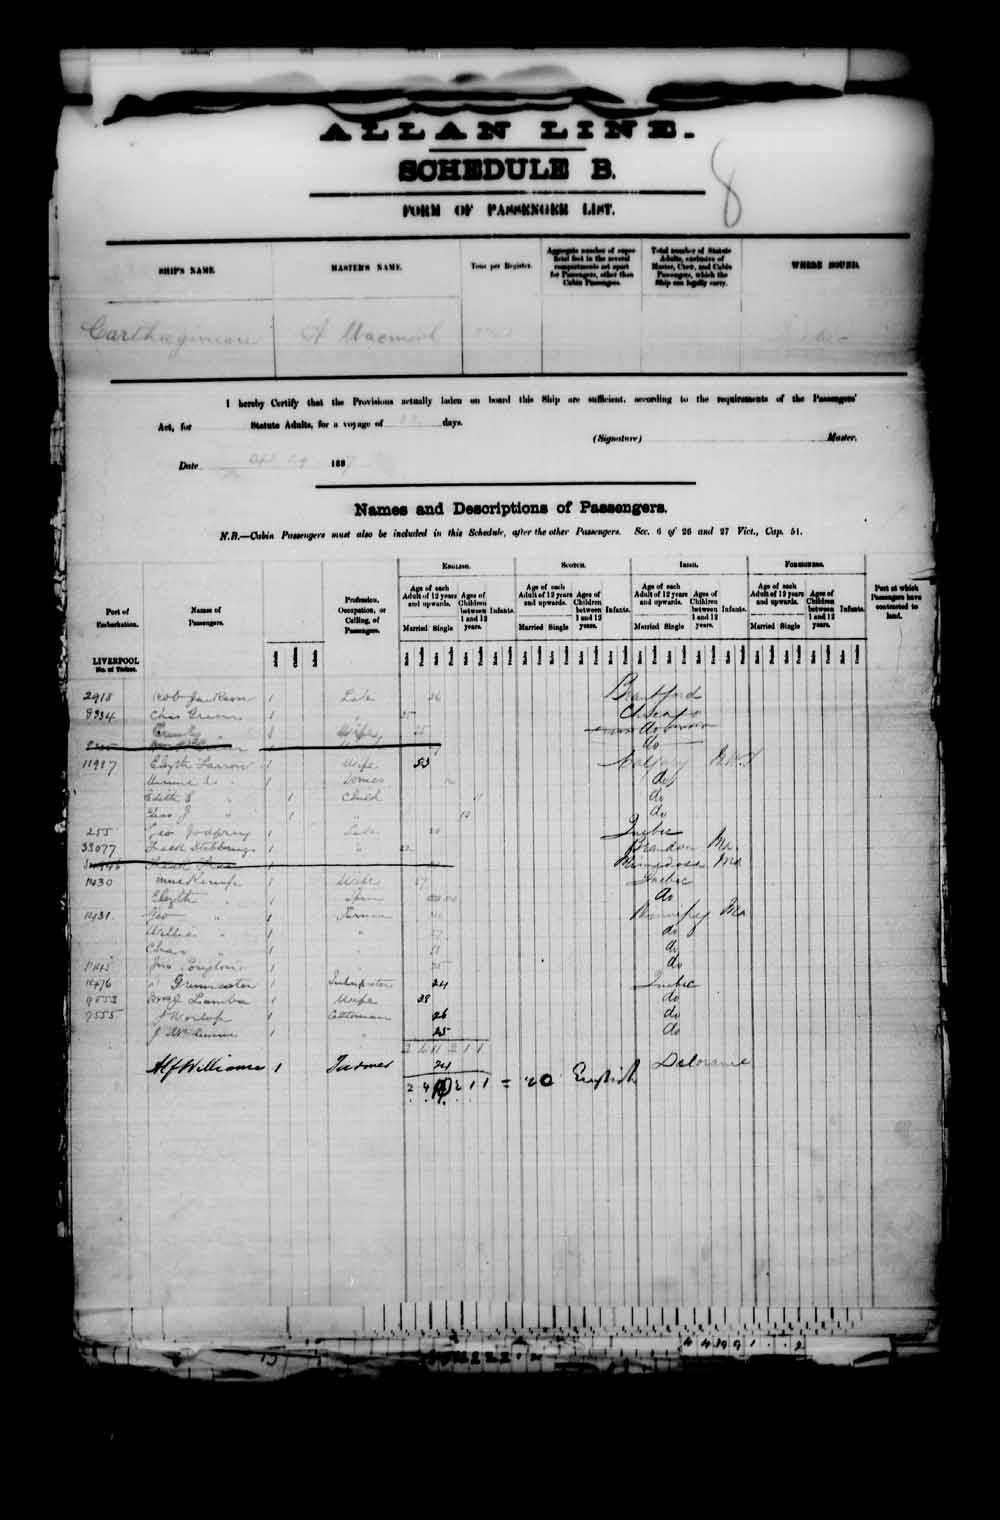 Digitized page of Passenger Lists for Image No.: e003546733